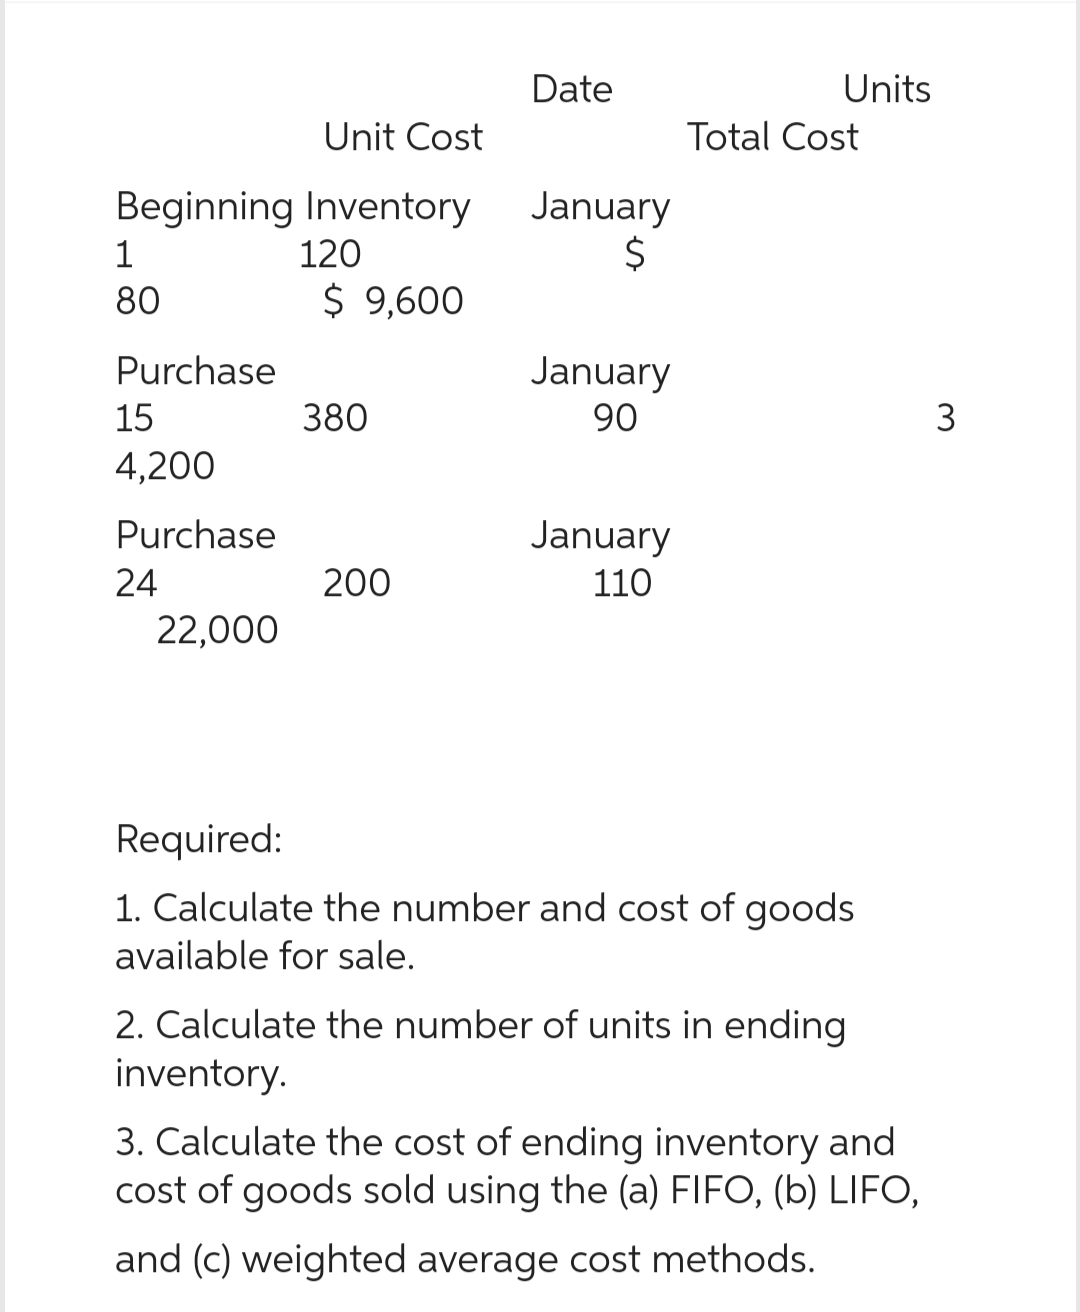 Beginning
1
80
Purchase
15
4,200
Purchase
24
22,000
Unit Cost
Inventory
120
$ 9,600
380
200
Date
January
$
January
90
January
110
Units
Total Cost
Required:
1. Calculate the number and cost of goods
available for sale.
2. Calculate the number of units in ending
inventory.
3. Calculate the cost of ending inventory and
cost of goods sold using the (a) FIFO, (b) LIFO,
and (c) weighted average cost methods.
3